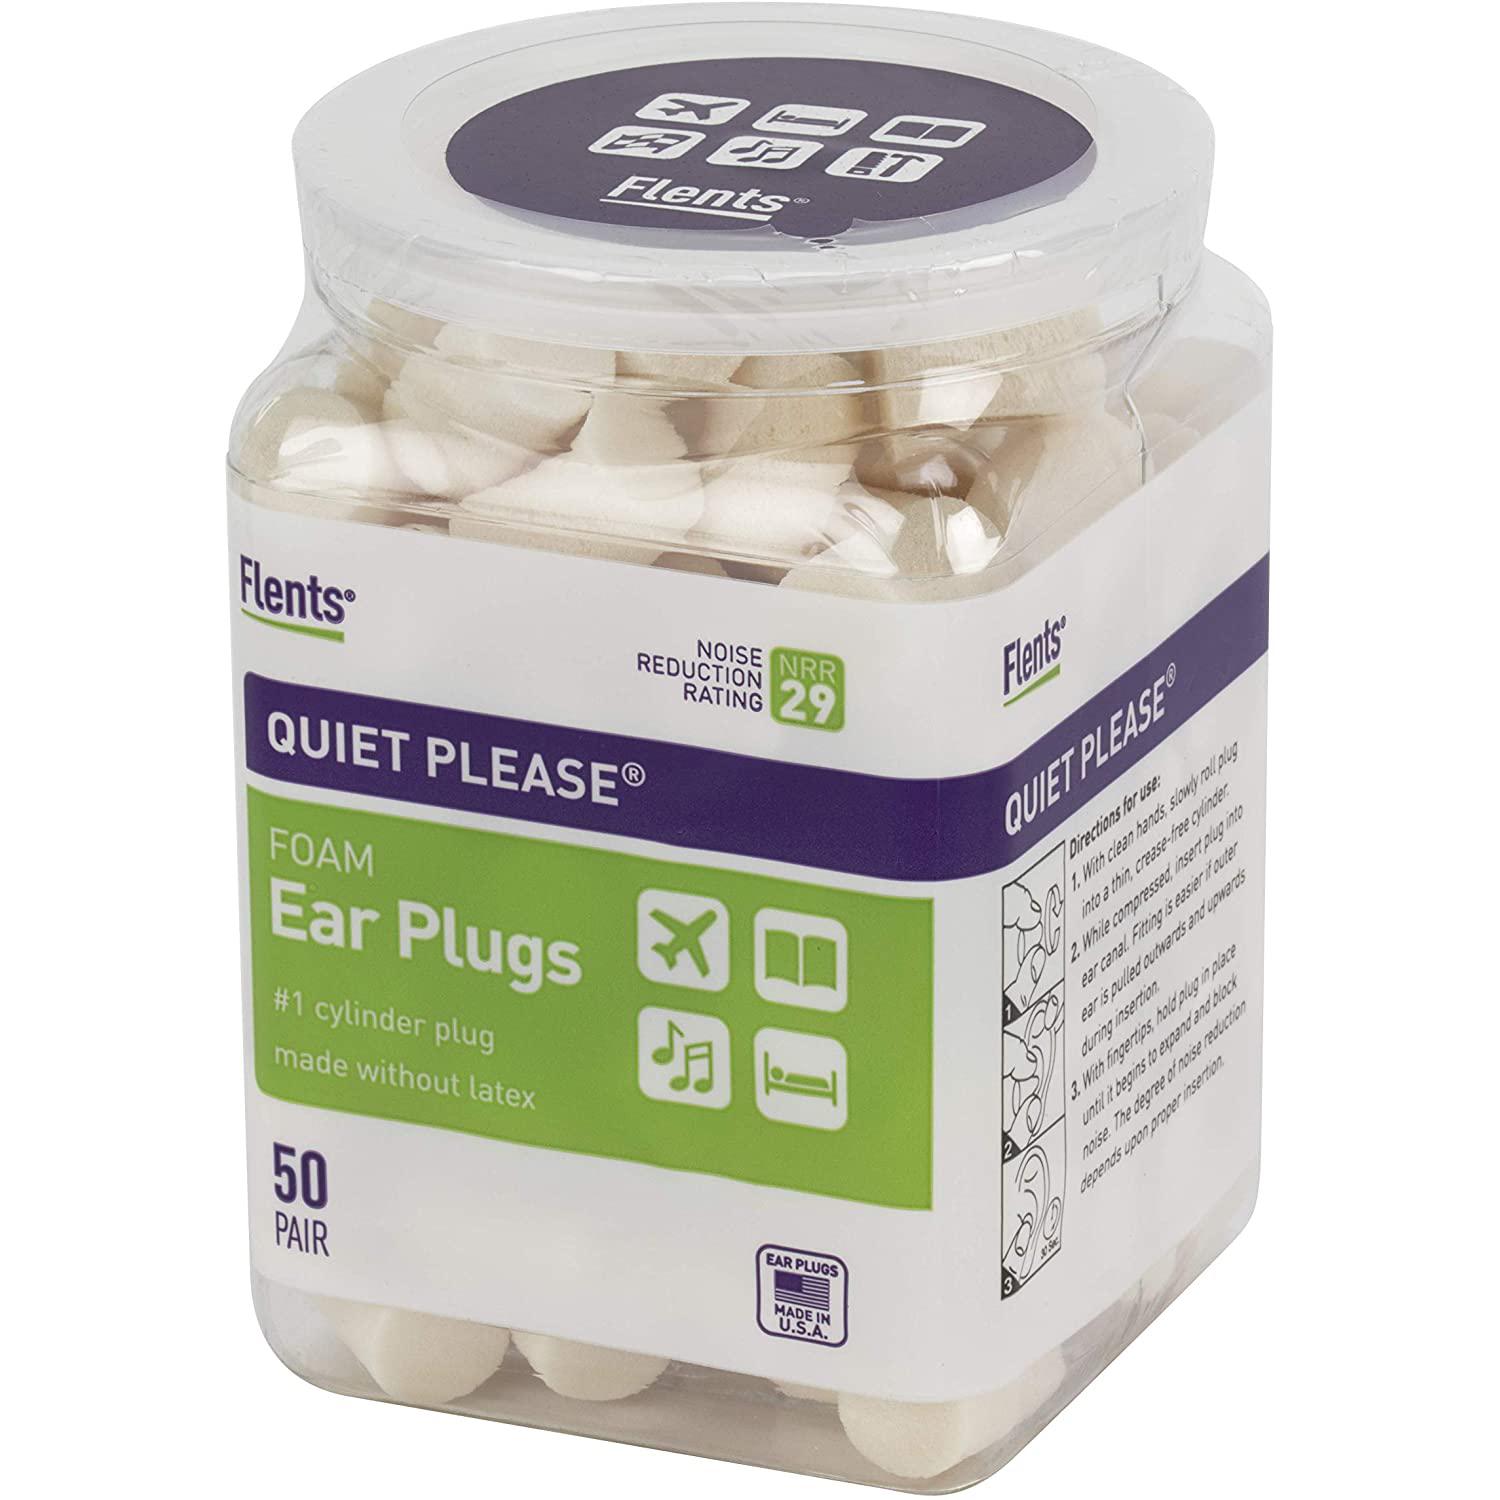 50 Flents Ear Plugs for $6.04 Shipped